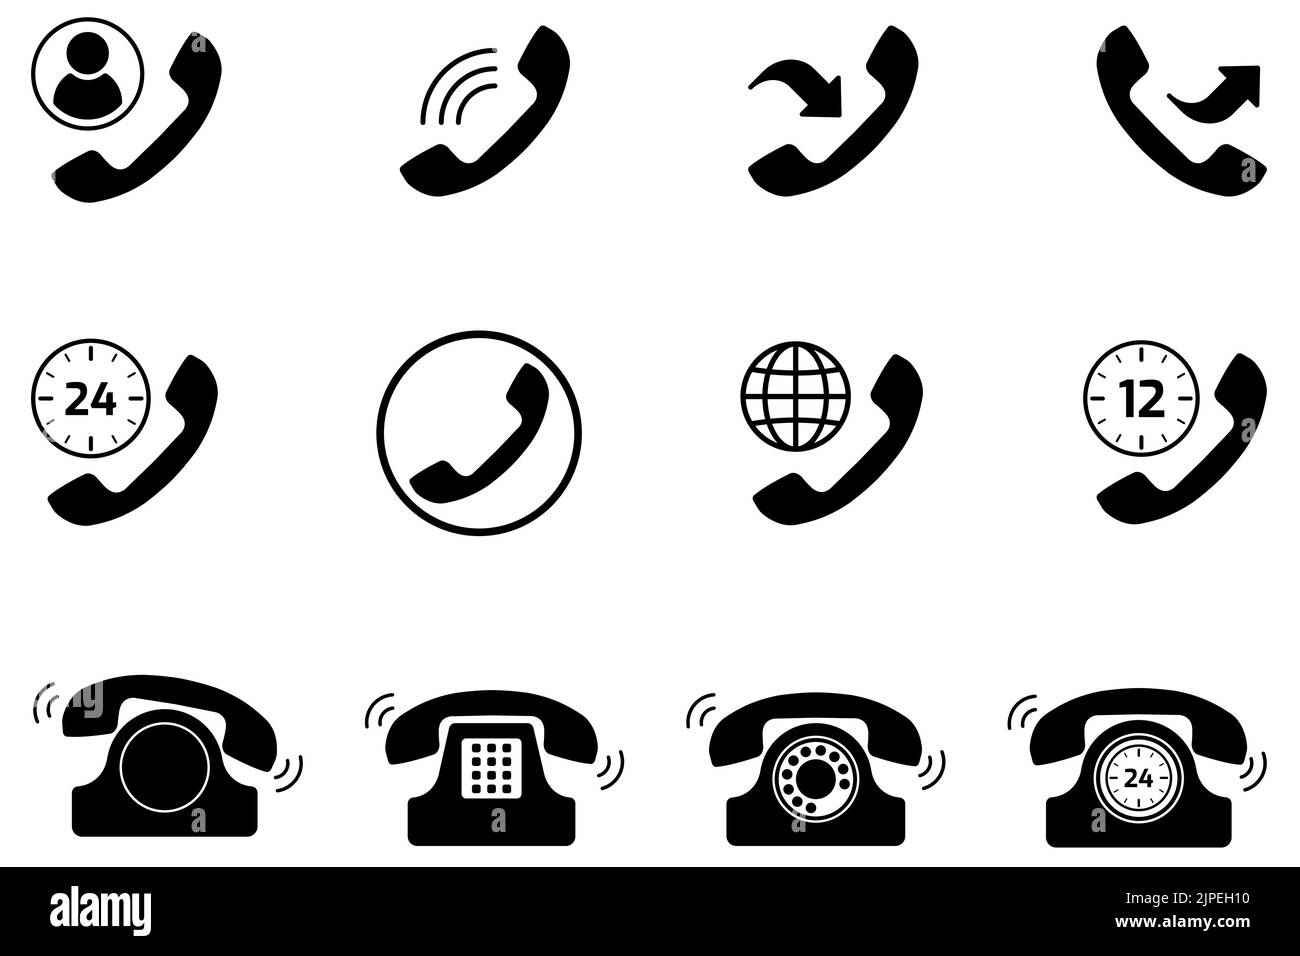 Telephone icon set. Collection of telephone symbols. Flat vector illustration Stock Vector